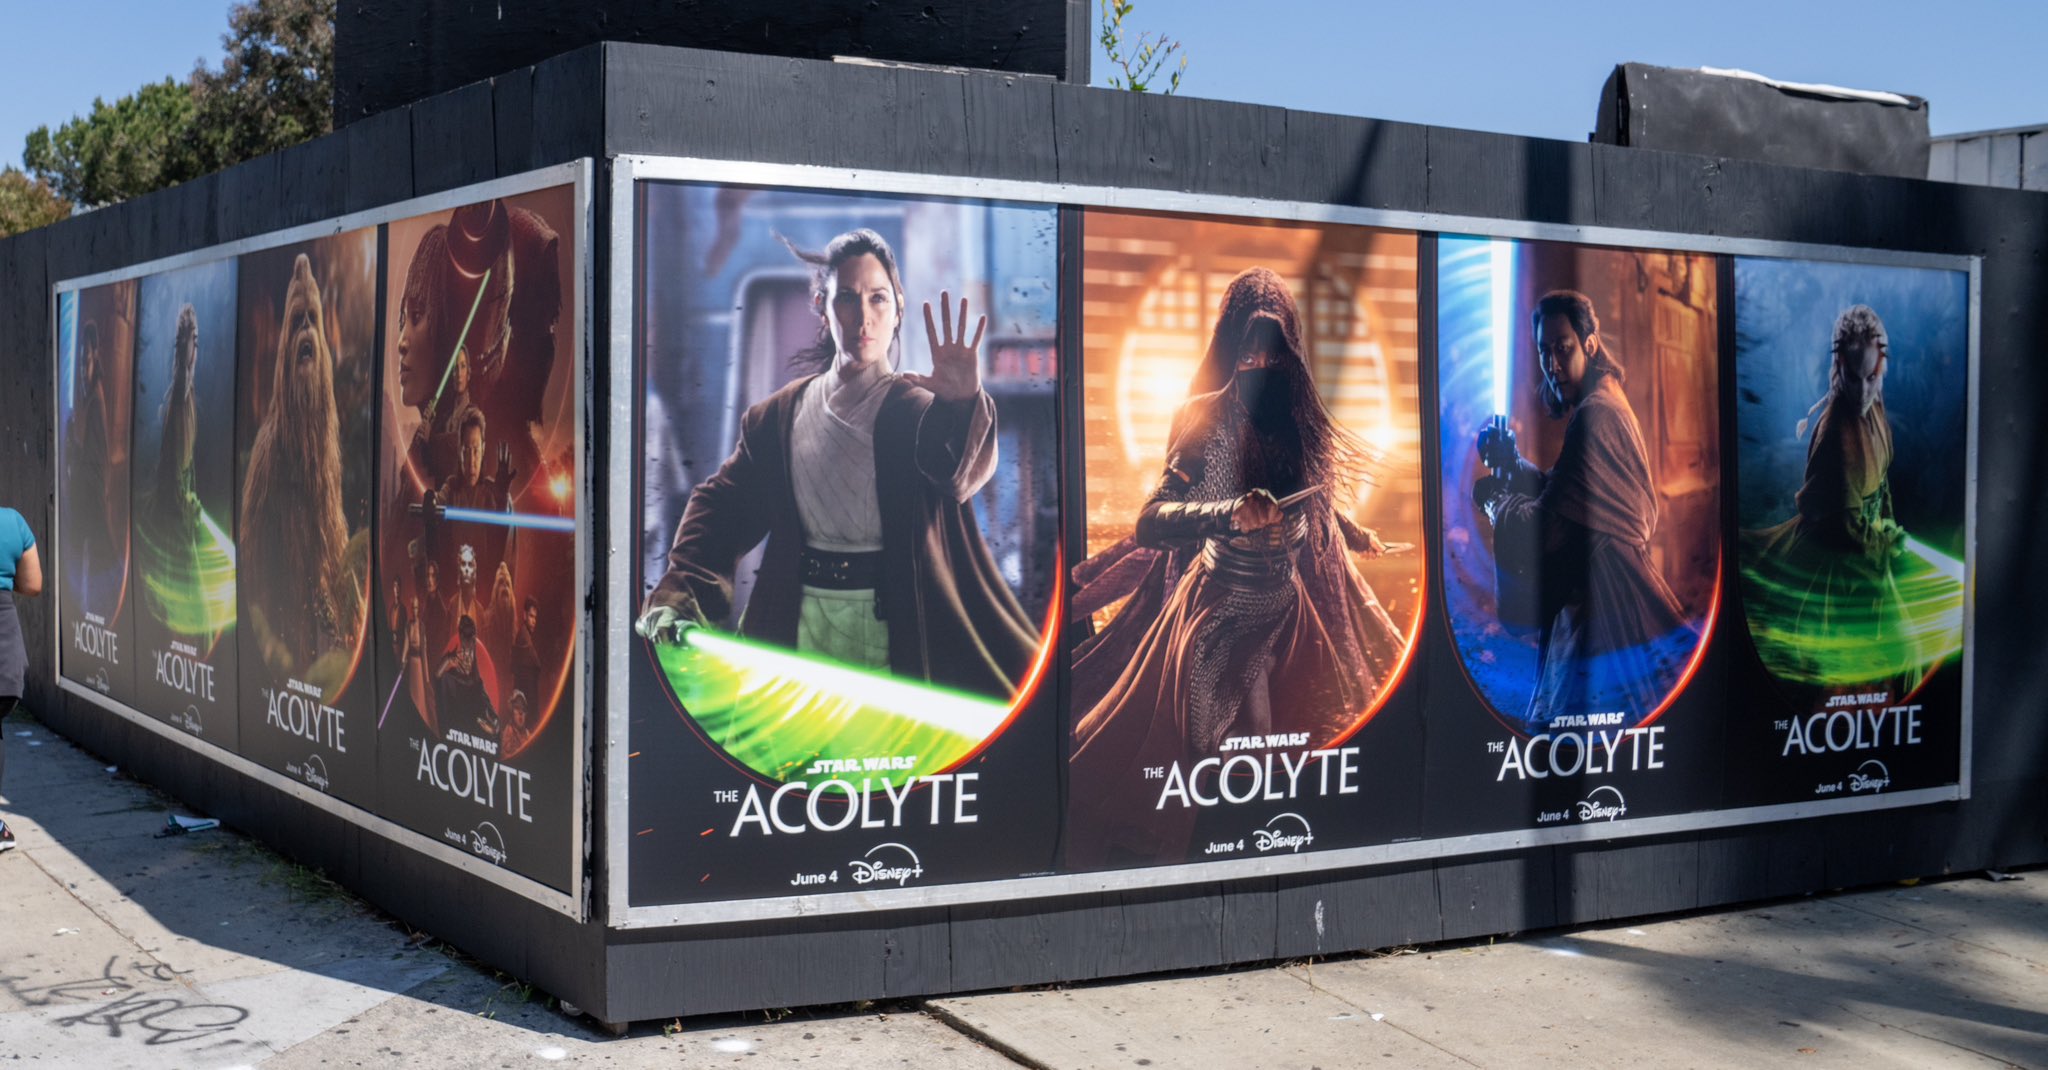 New ‘The Acolyte’ Character Posters Revealed In New Street Billboards [Video]